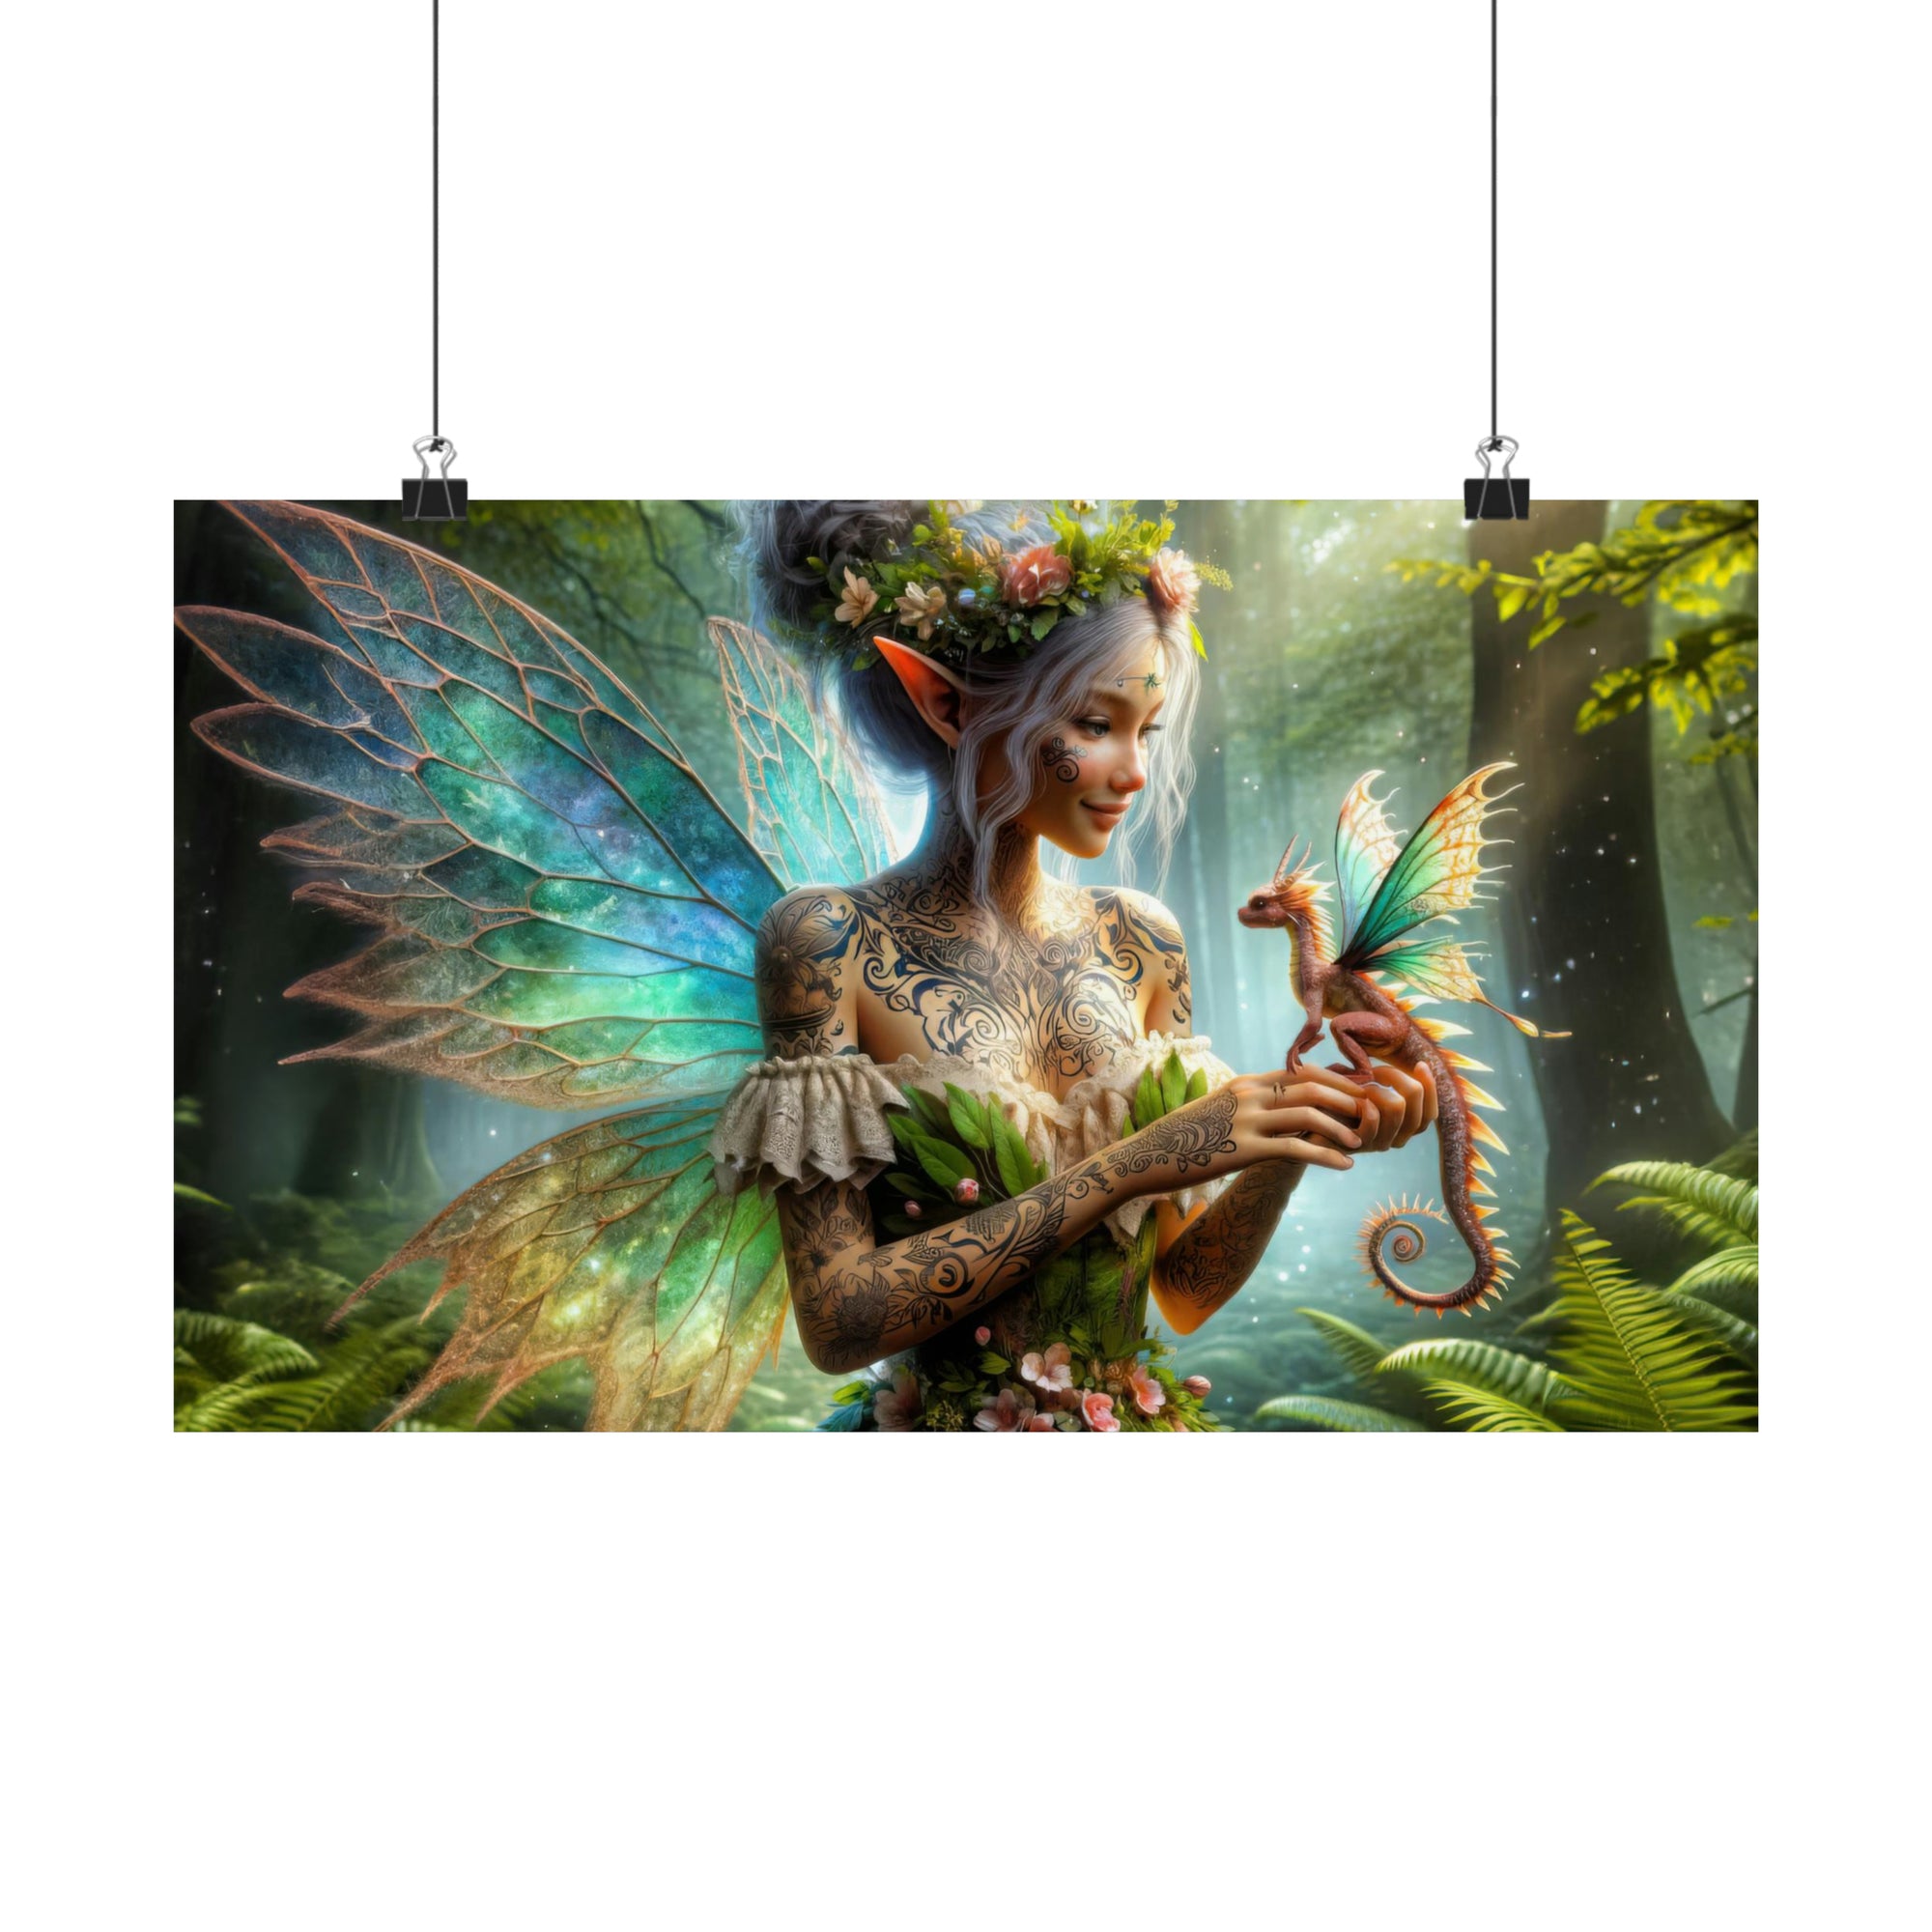 The Faerie and Her Dragonette Poster